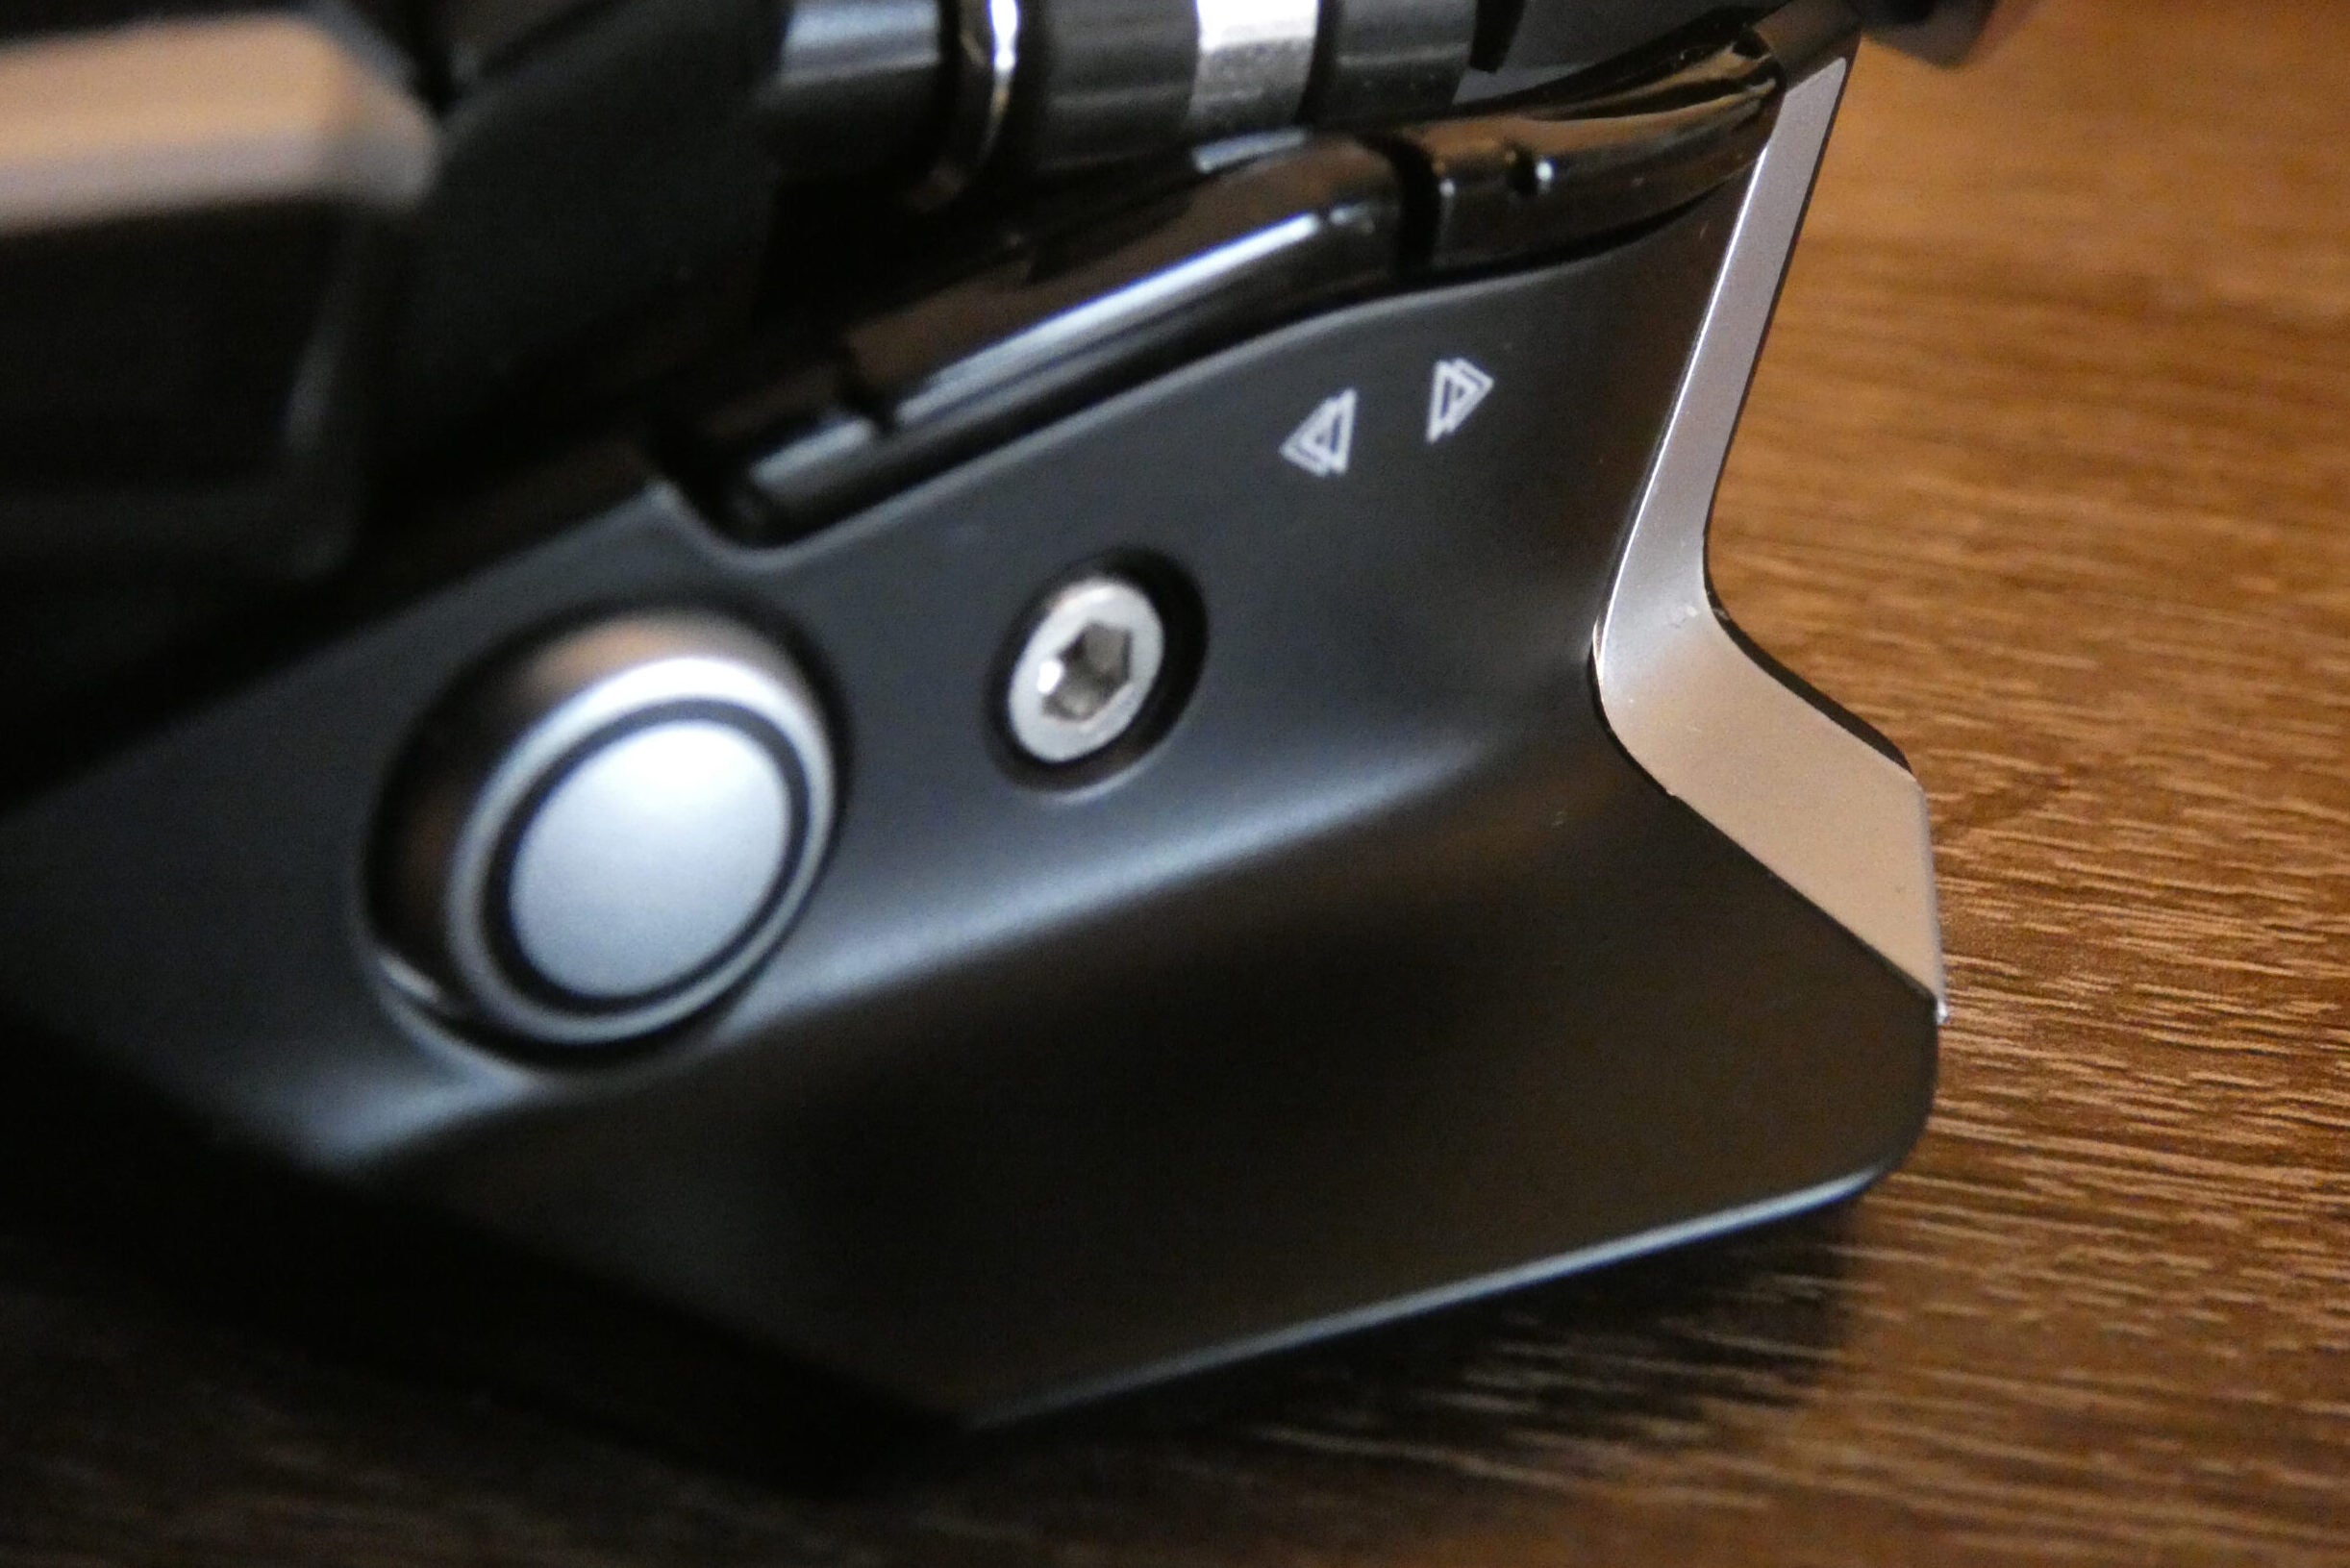 side view of gaming mouse with button and screw in sight